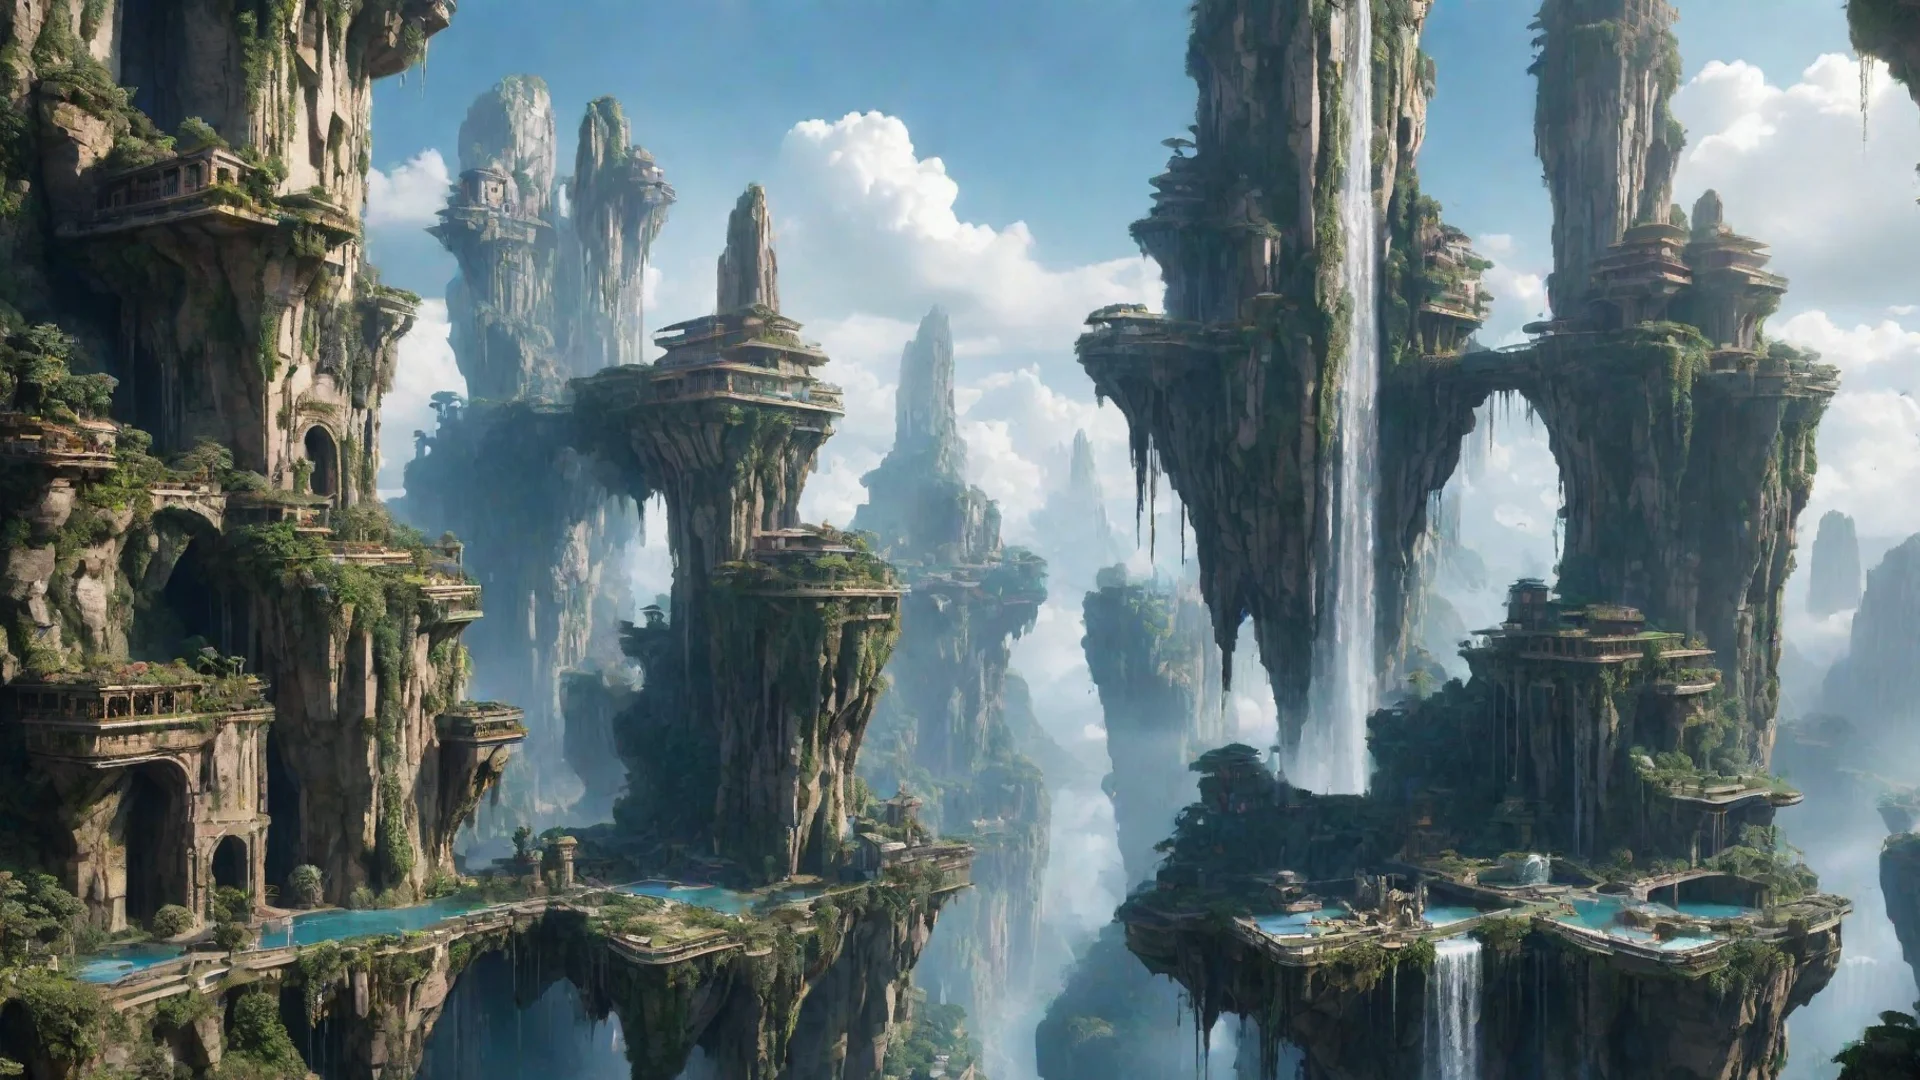 aifuturistic city amazing unreal architecture in sky epic floating city on floating cliffs with waterfalls down beautiful sky hanging gardens hd aesthetic wide